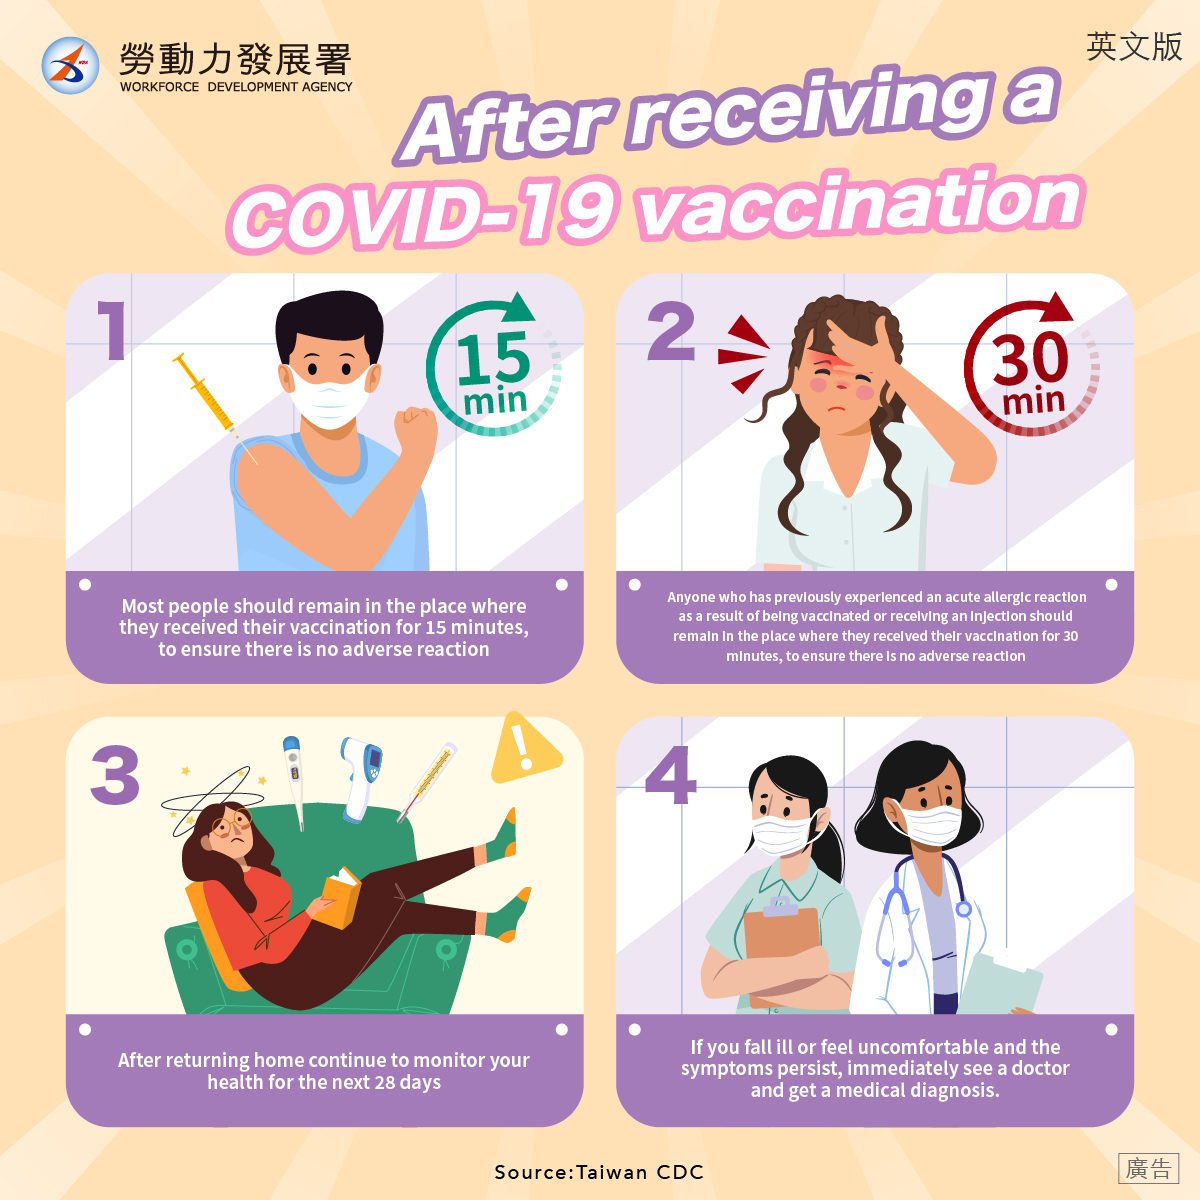 After your COVID-19 vaccination